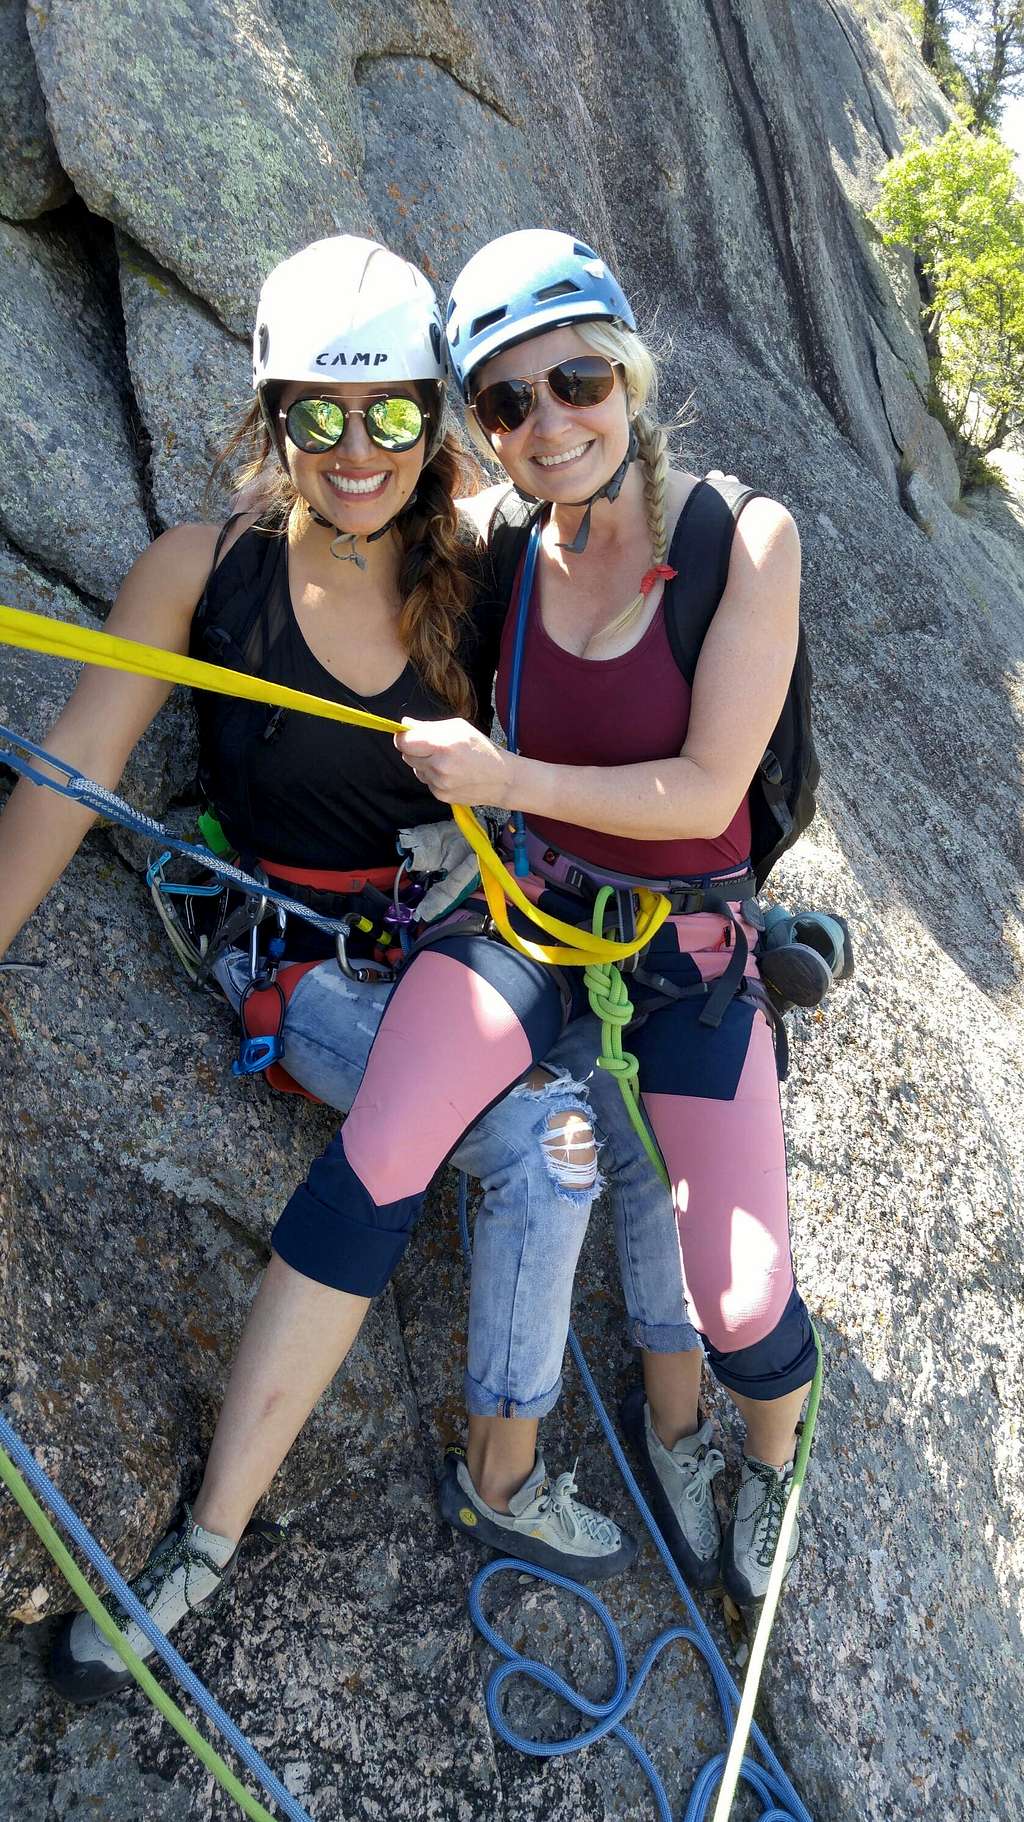 Erica and Heather at the P1 Belay